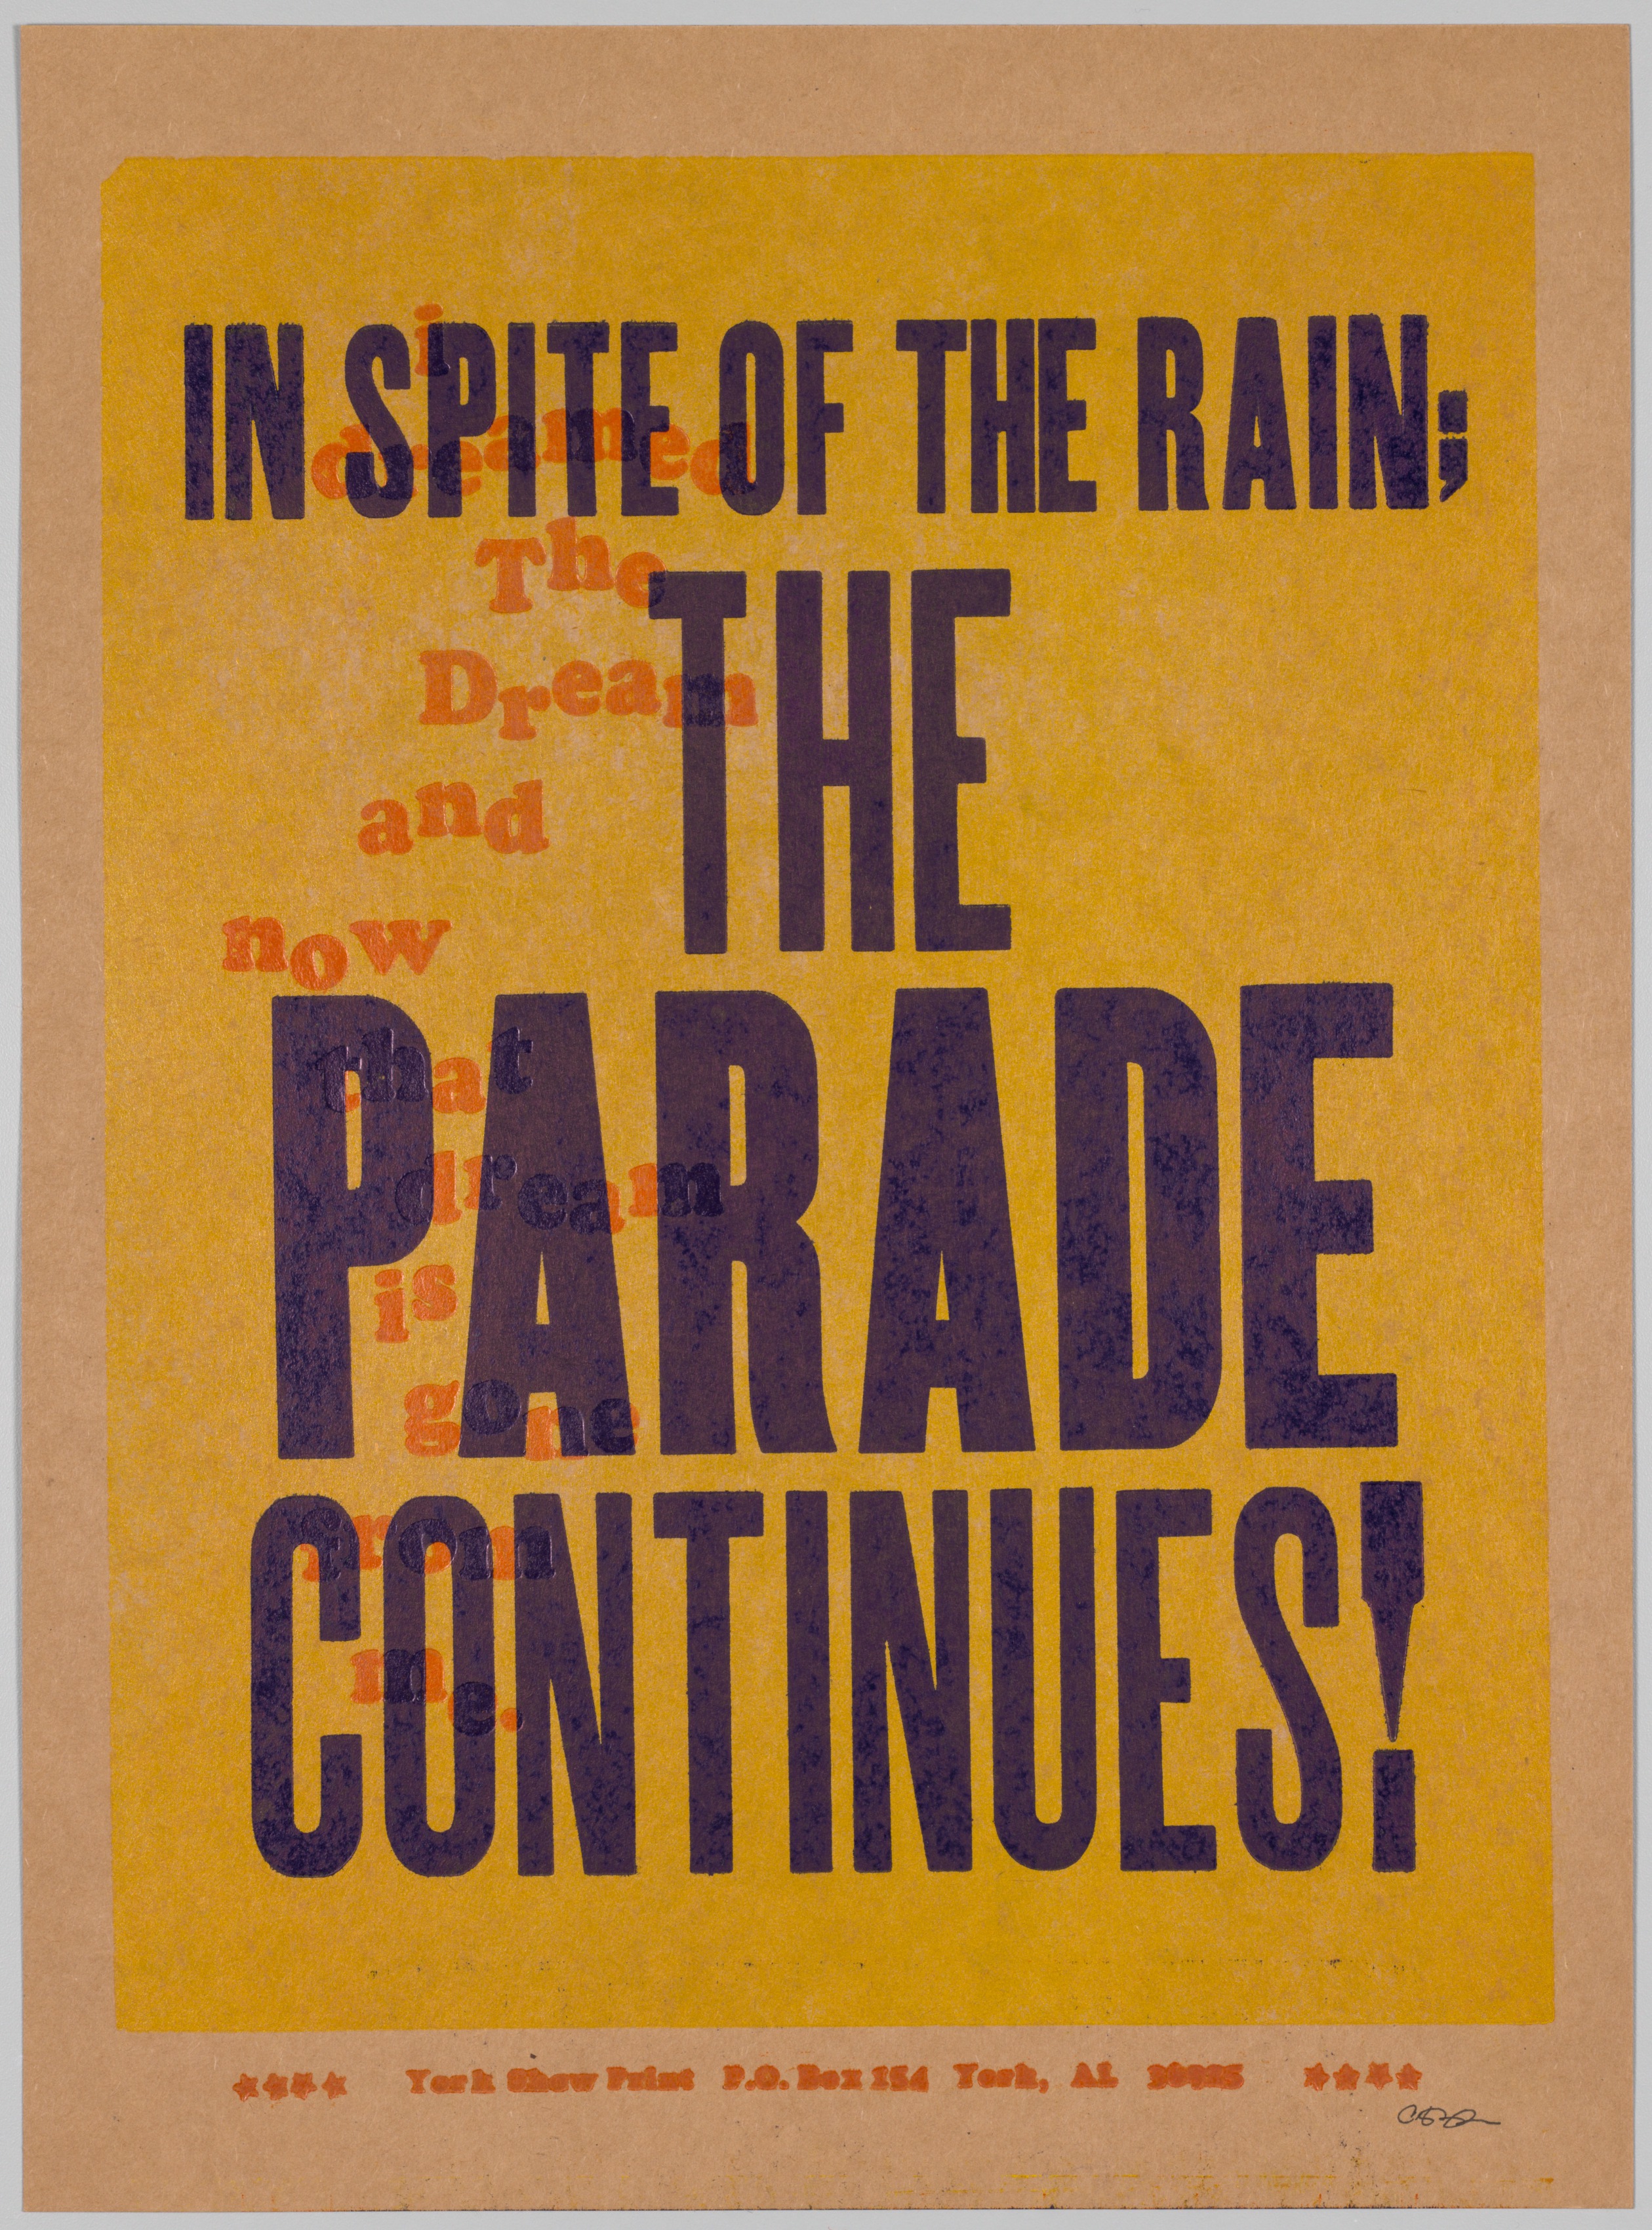 The Bad Air Smelled of Roses: In Spite of the Rain, The Parade Continues